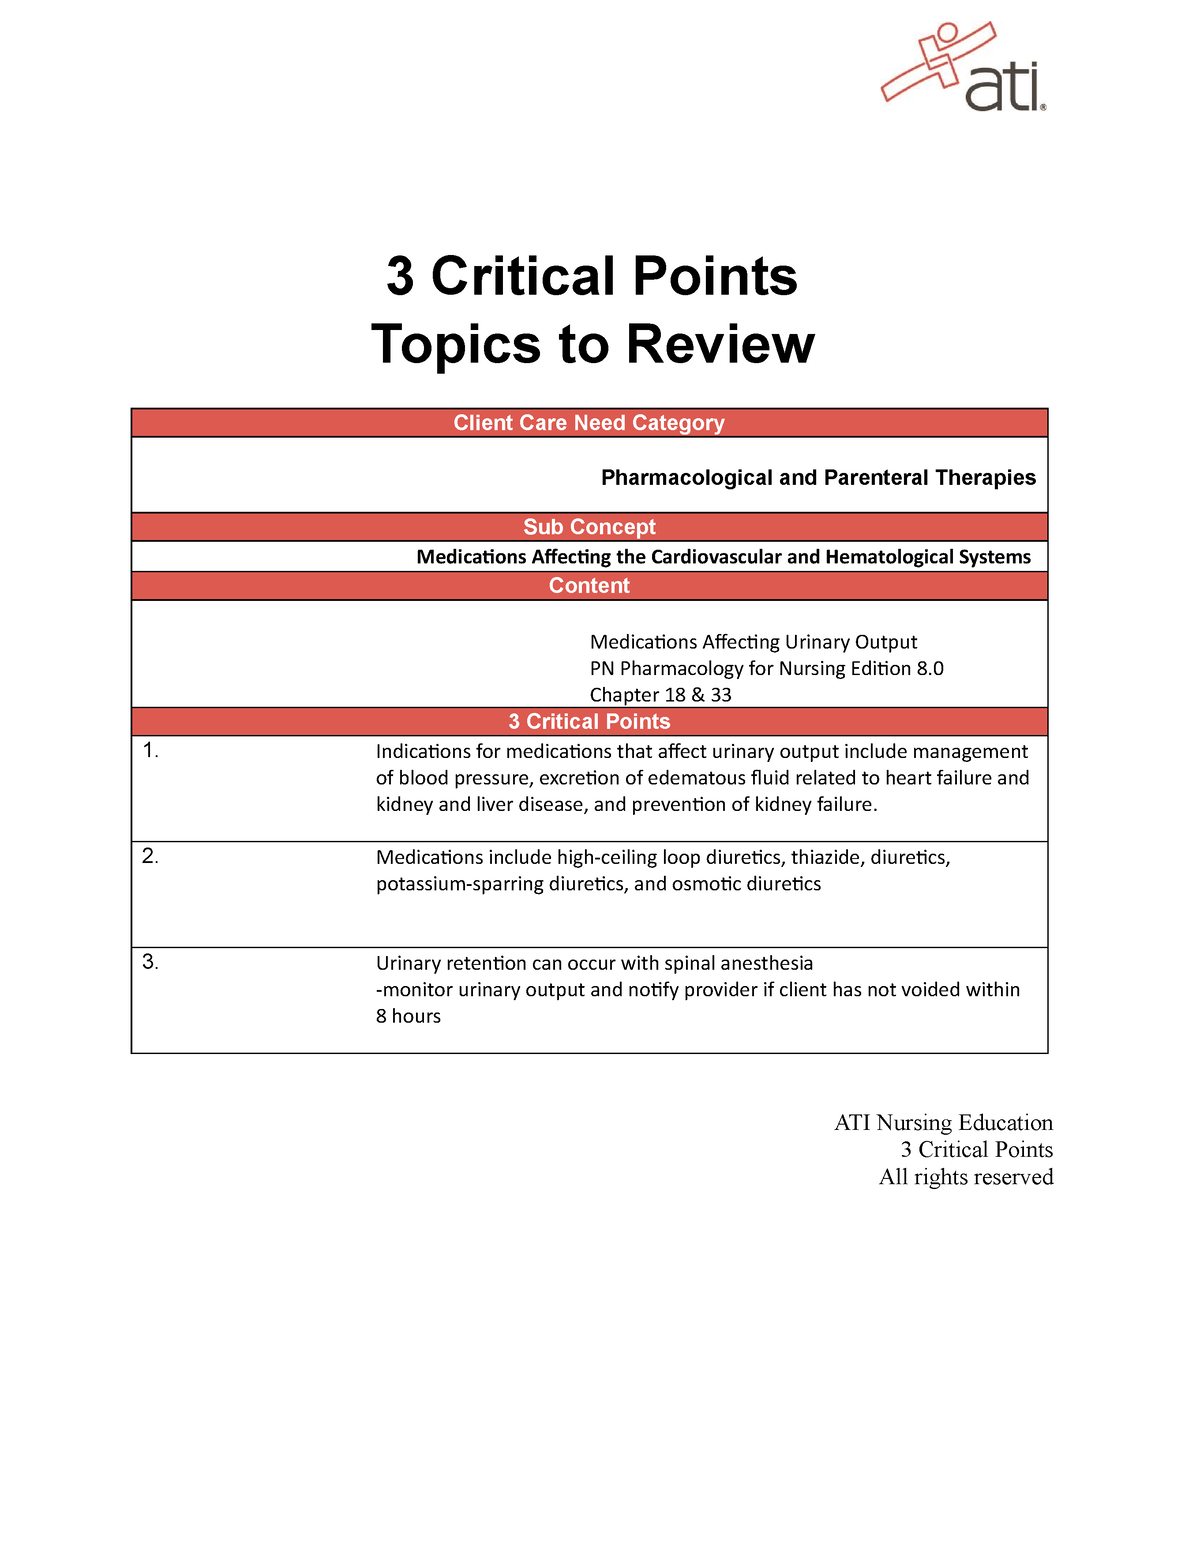 ATI 3 critical points pharmacology practice 2 3 Critical Points